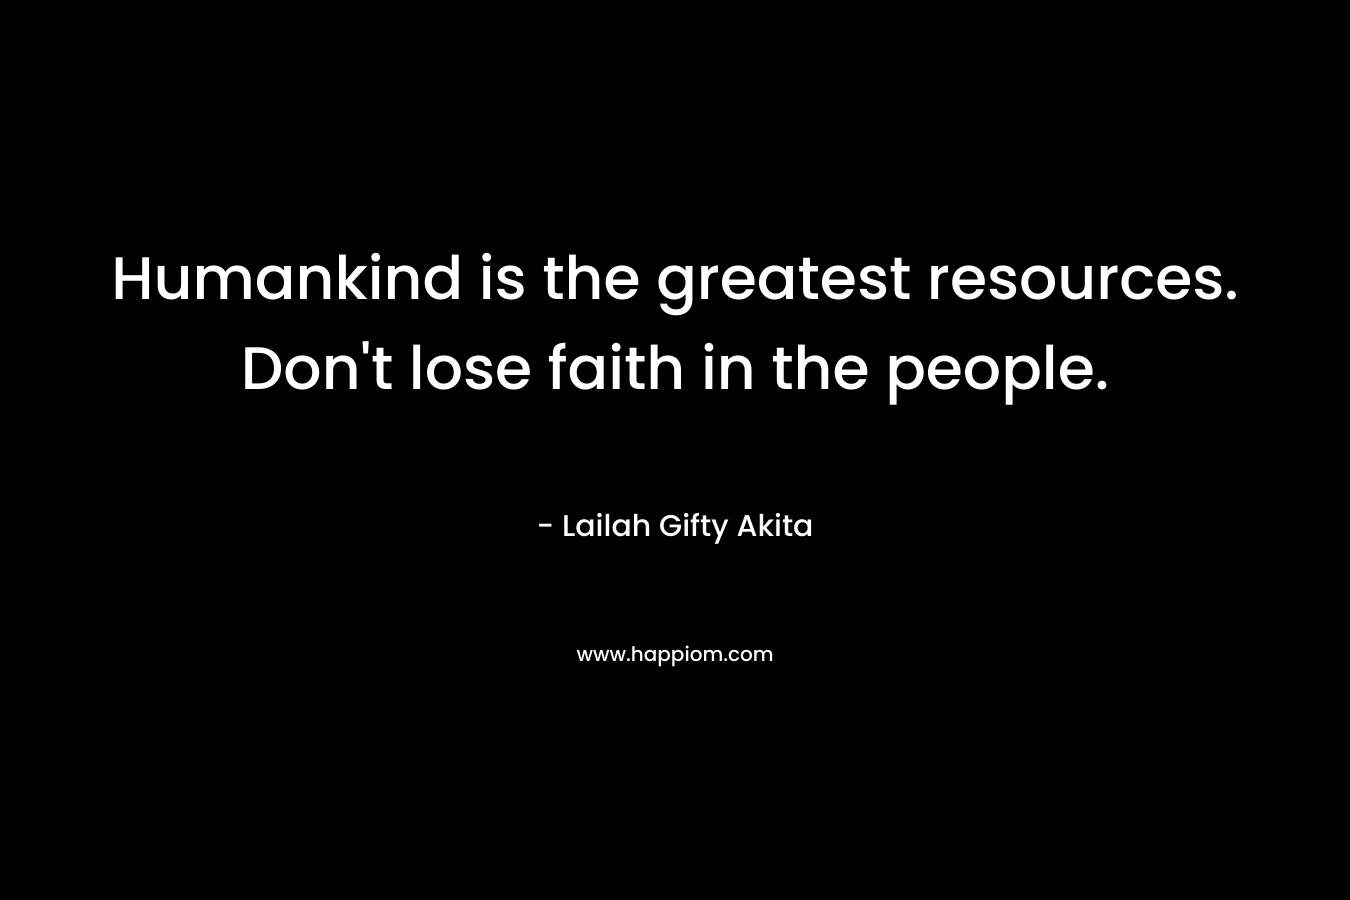 Humankind is the greatest resources. Don't lose faith in the people.